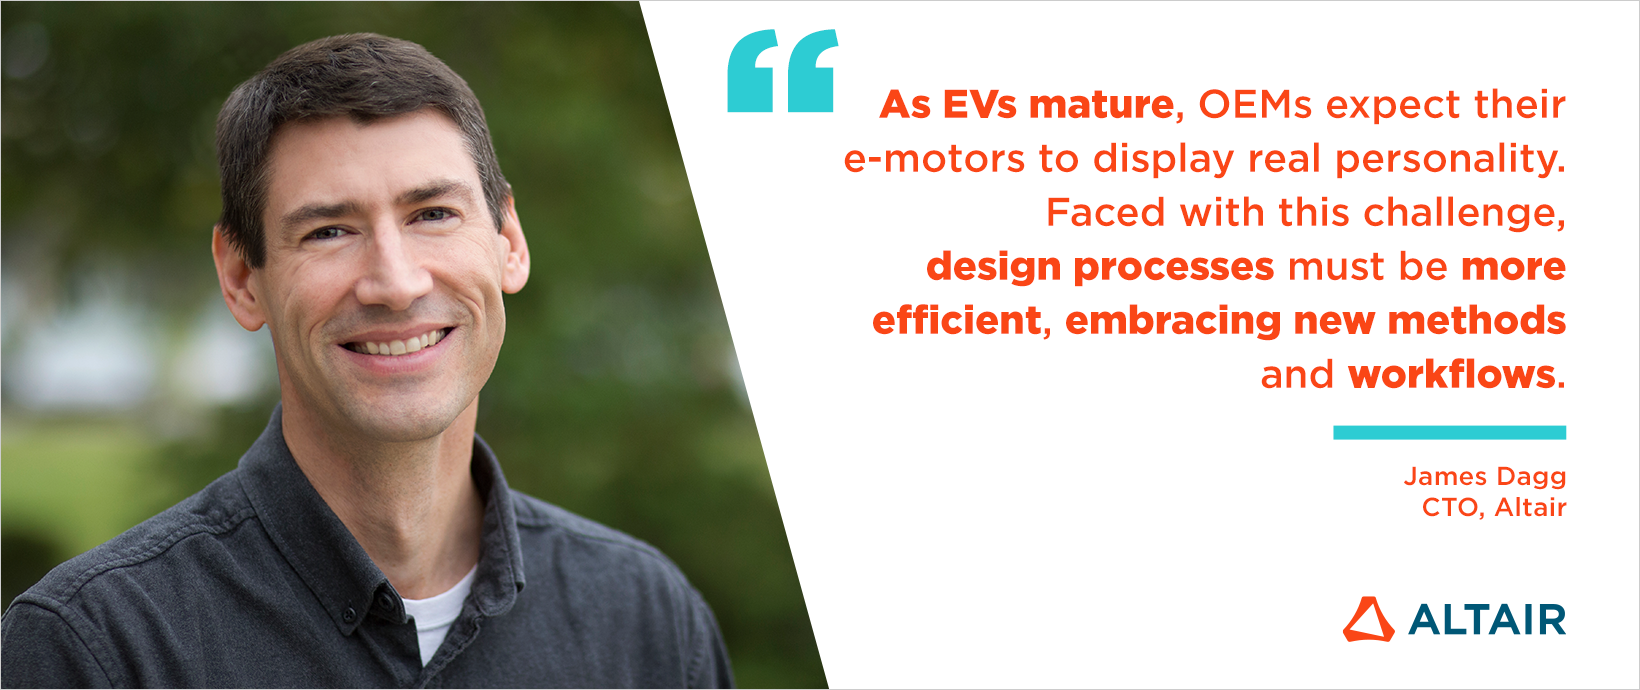 Bringing Personality to the Automotive e-Motor